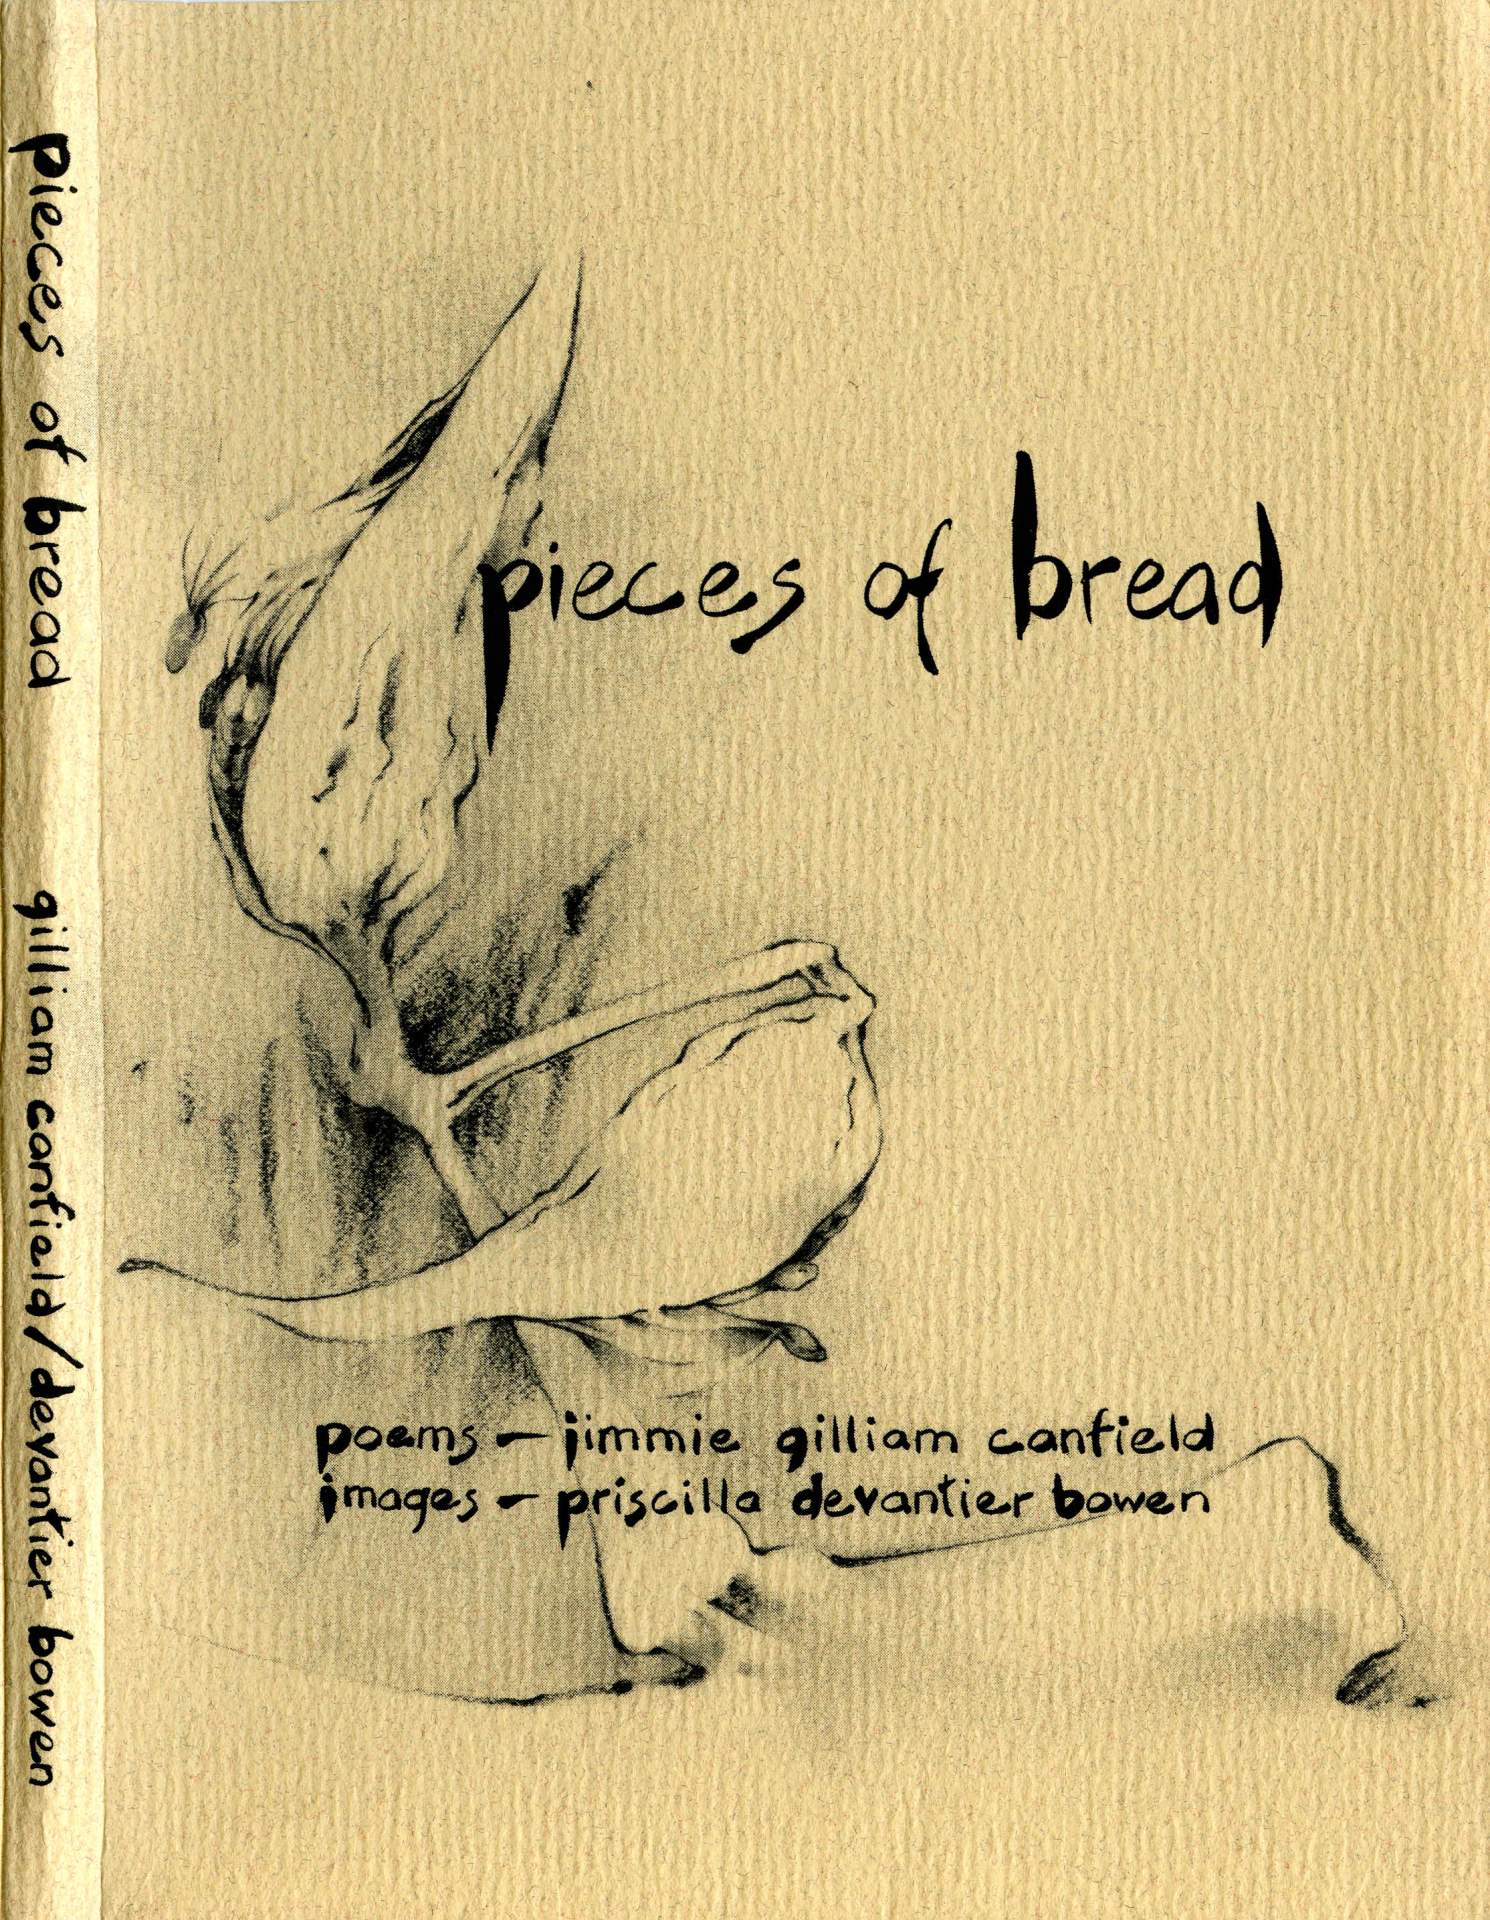 Cover Page of Pieces of Bread, Poems - Jimmie Gilliam Canfield, Images - Priscilla Devantier Bowen